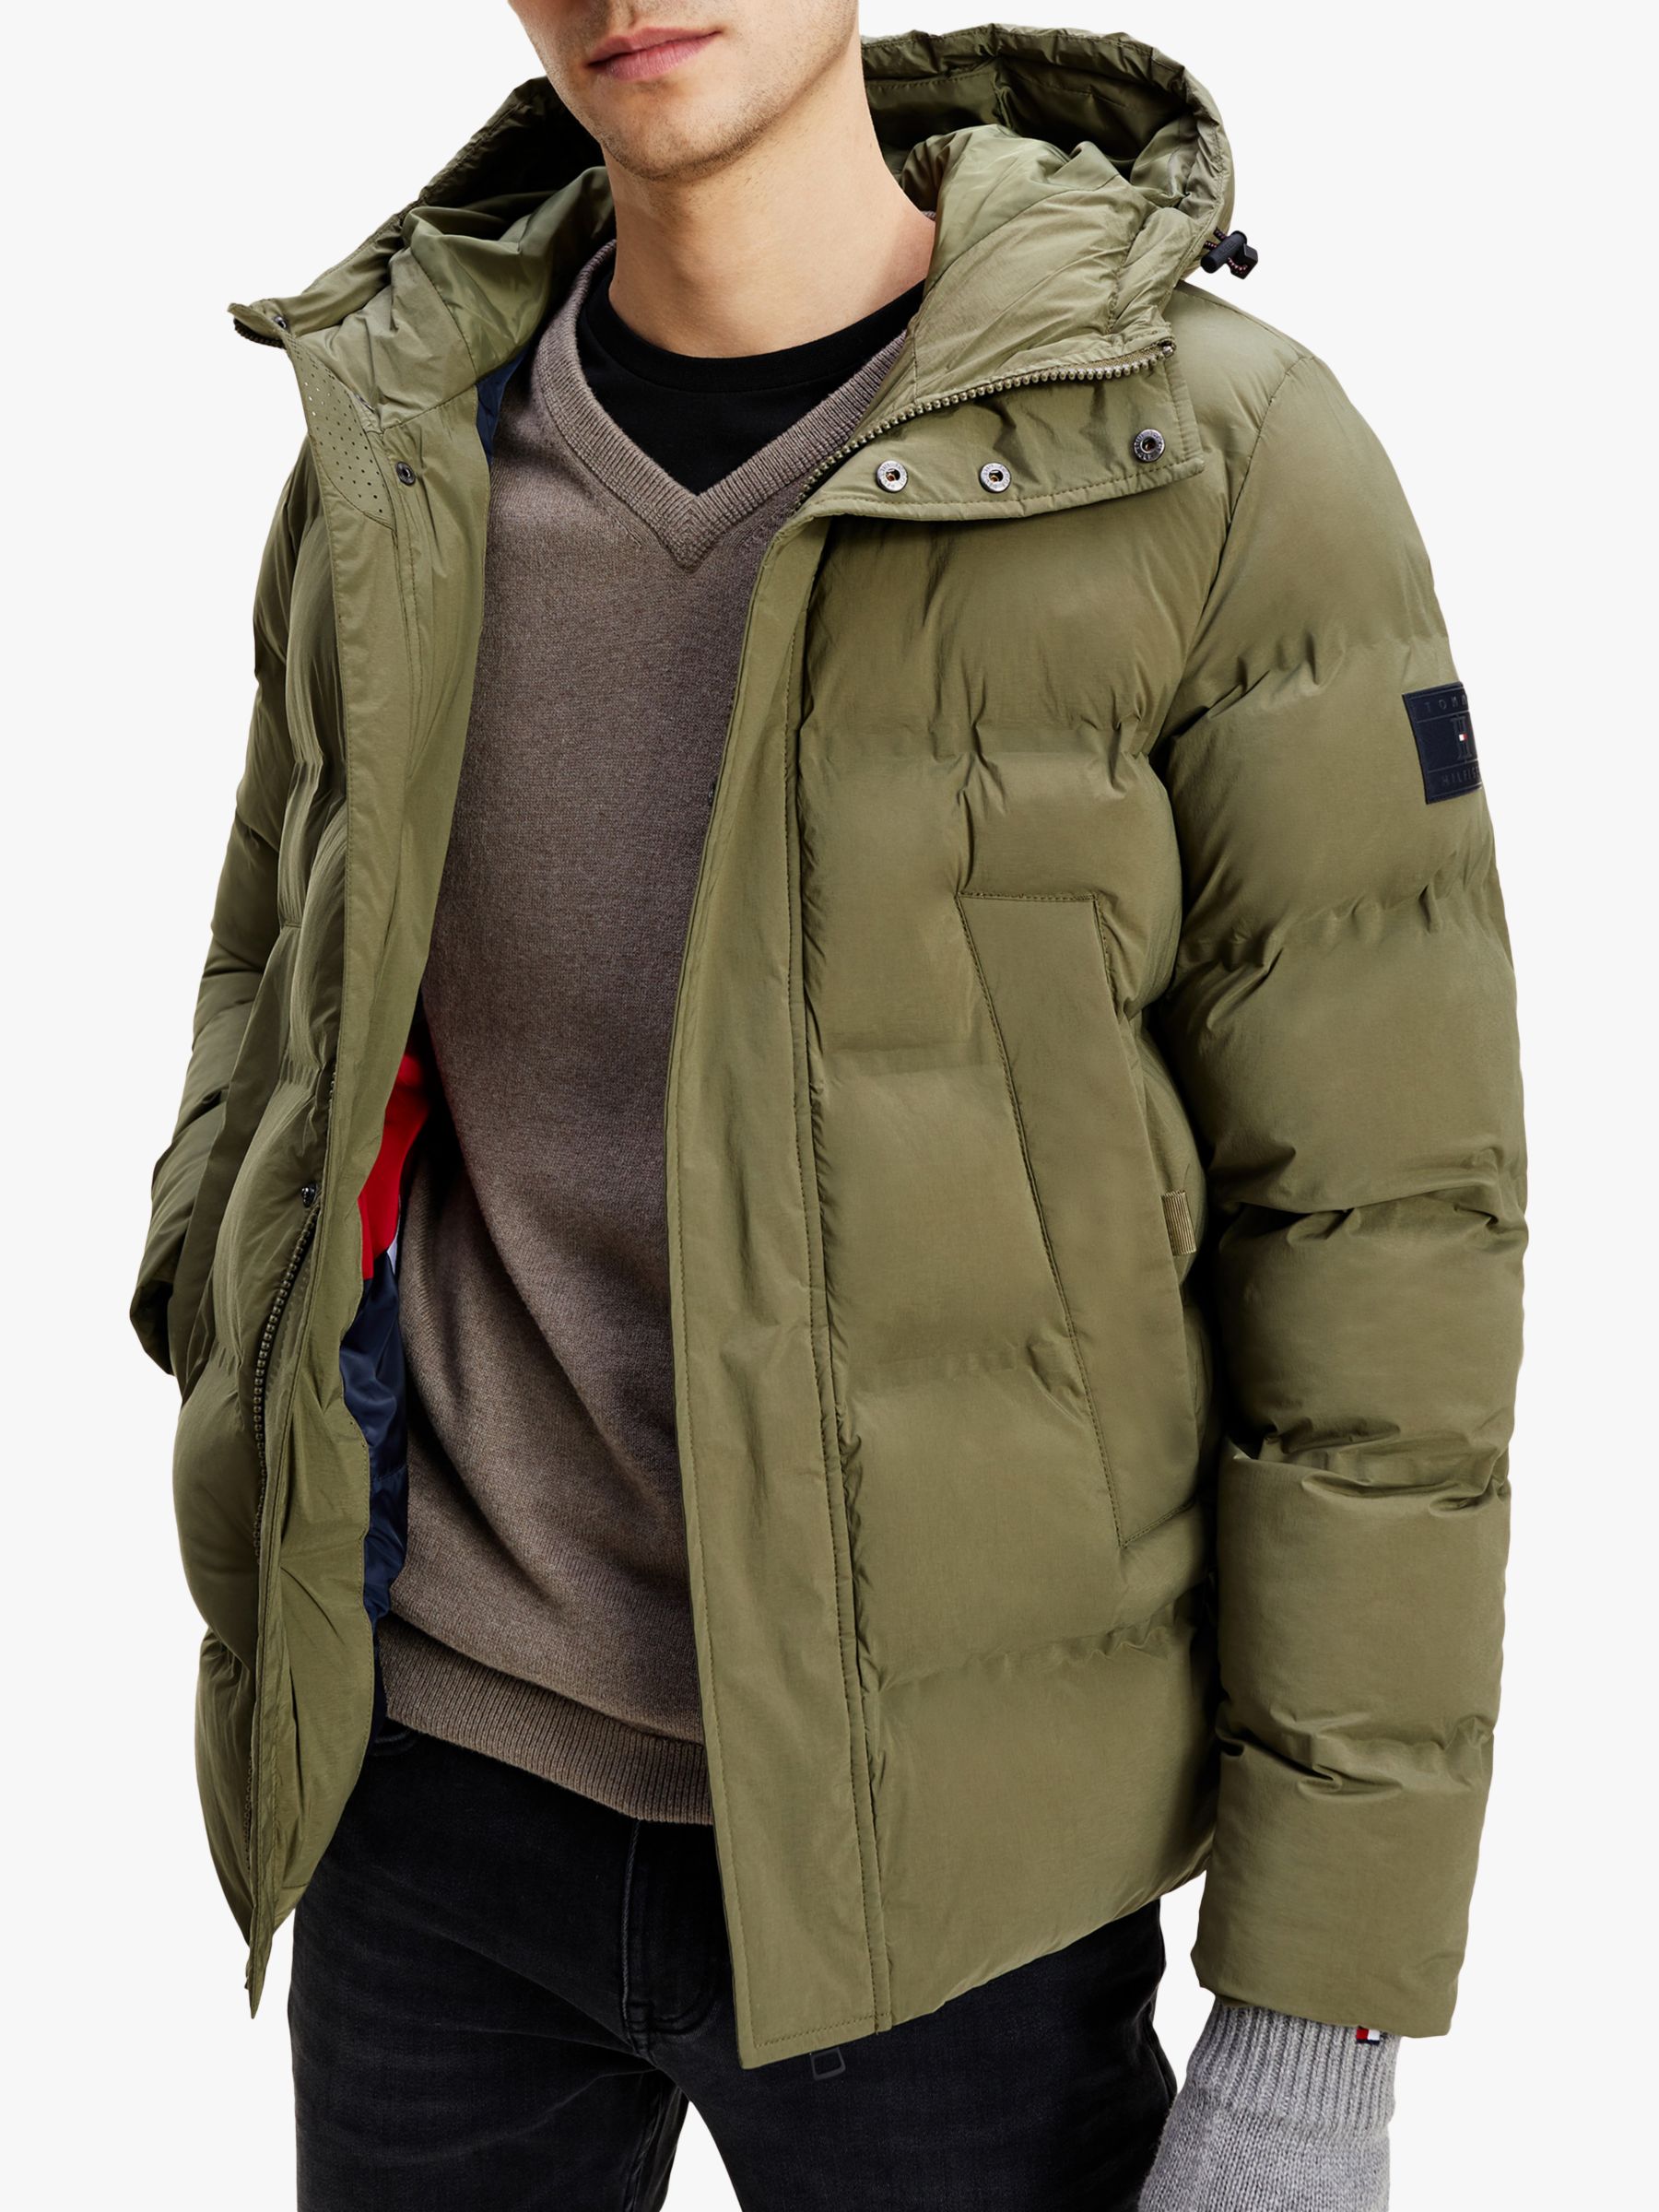 tommy hilfiger hooded puffer jacket